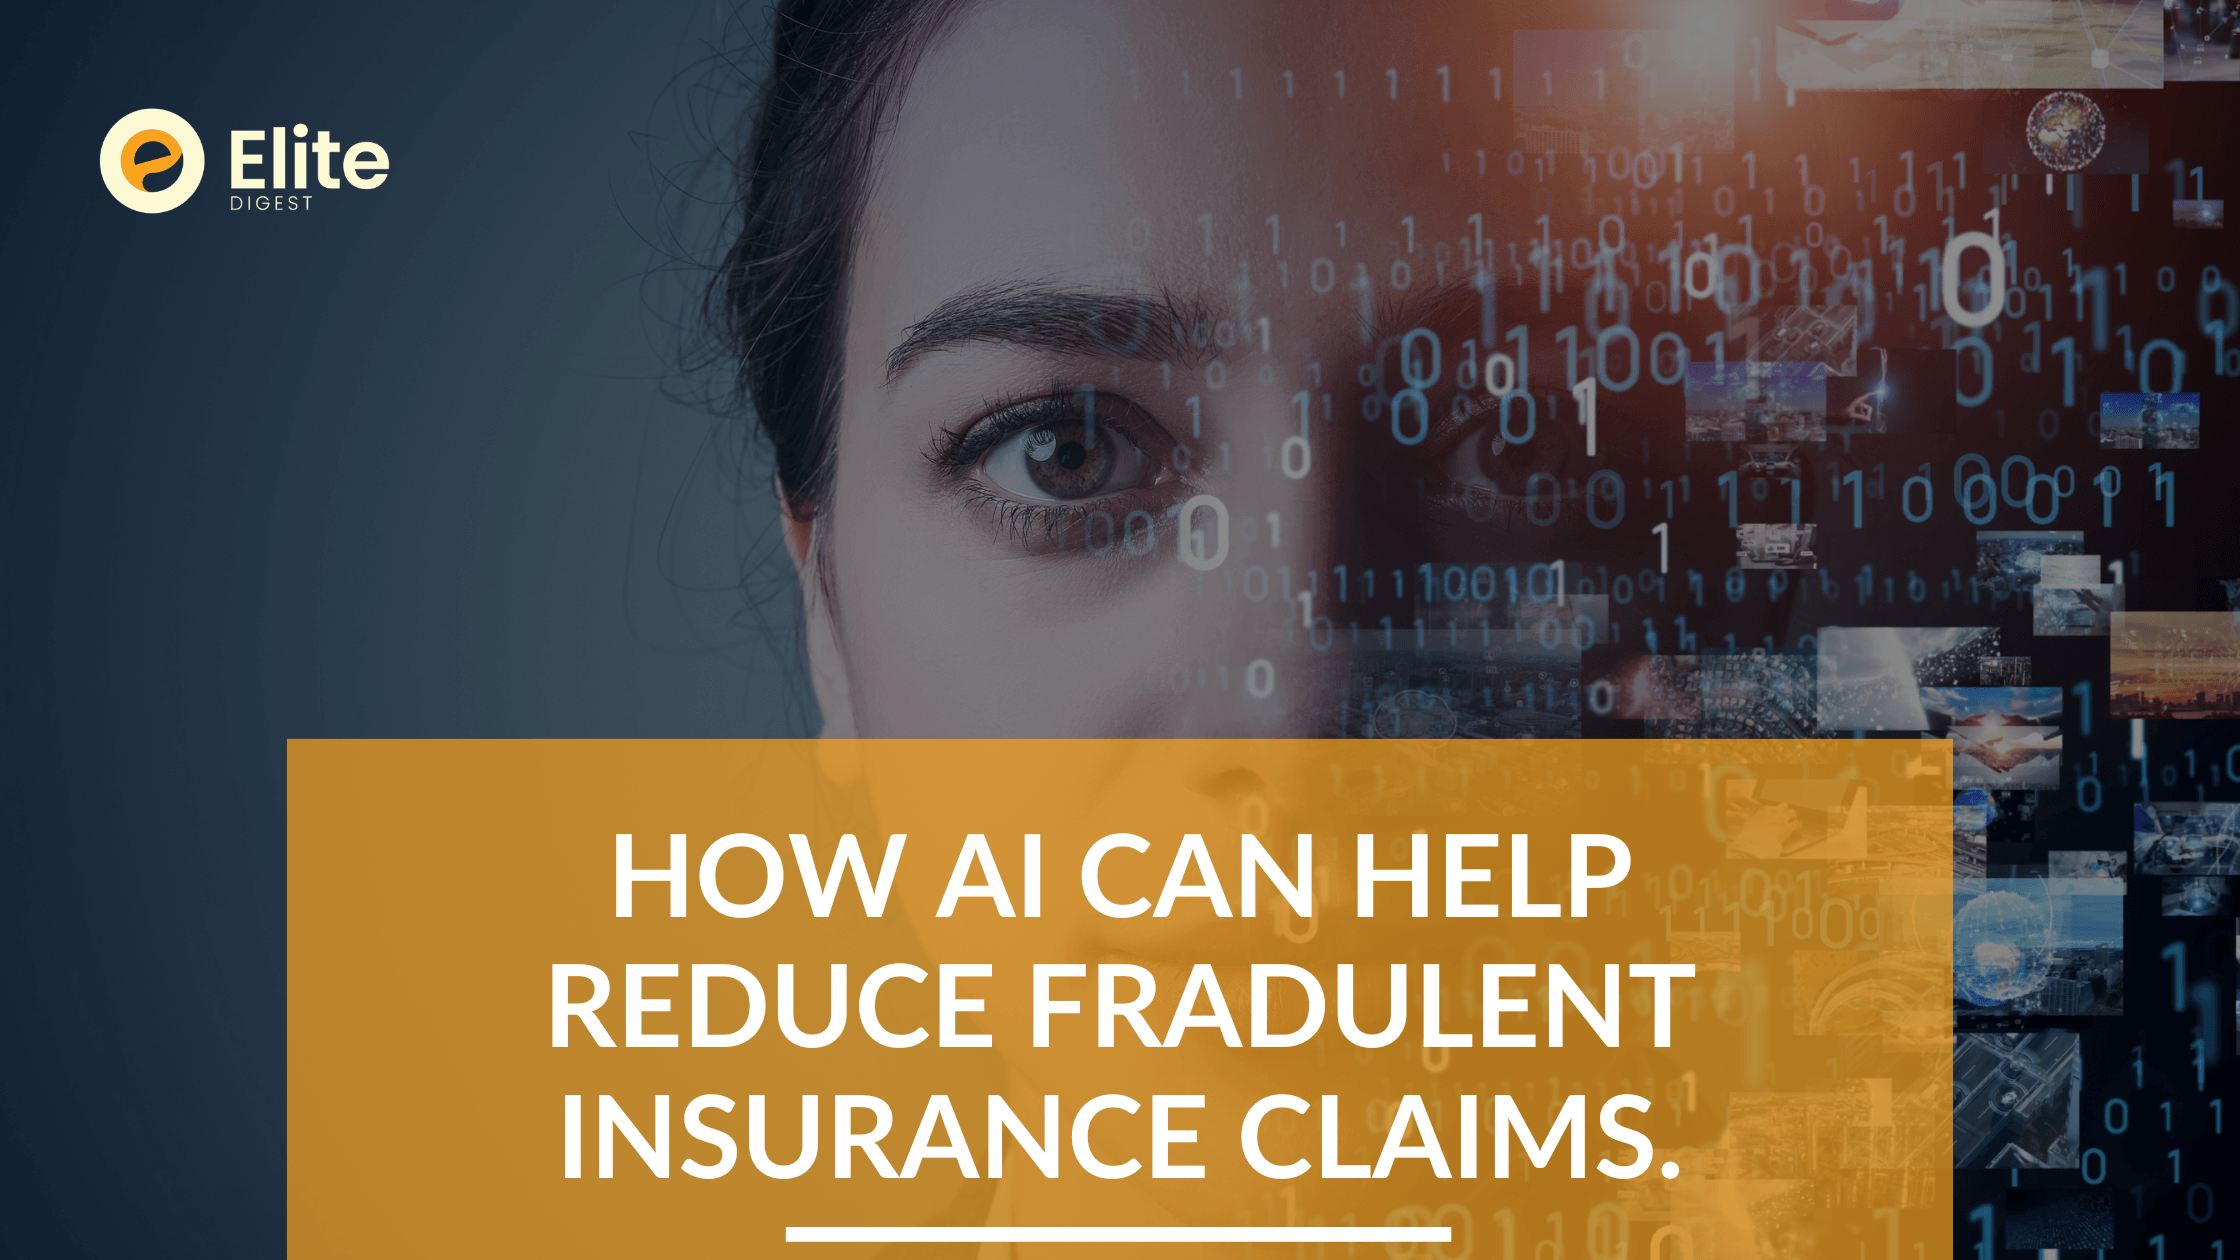 How AI Can Help reduce Fradulent Insurance Claims.